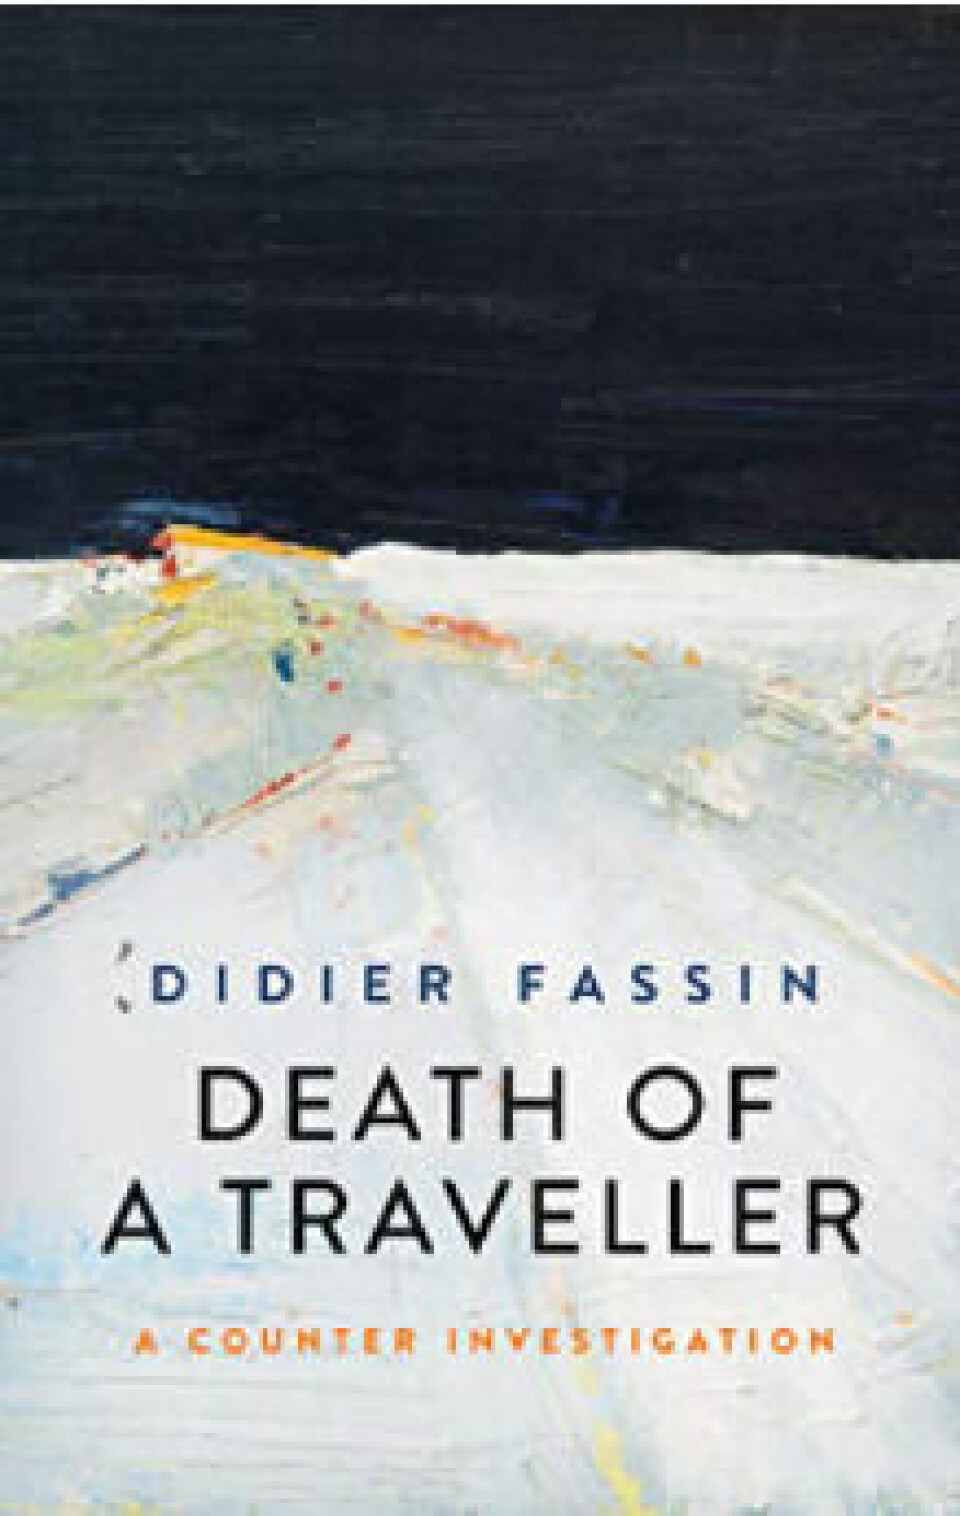 Death of a Traveller: A Counter Investigation Didier Fassin,